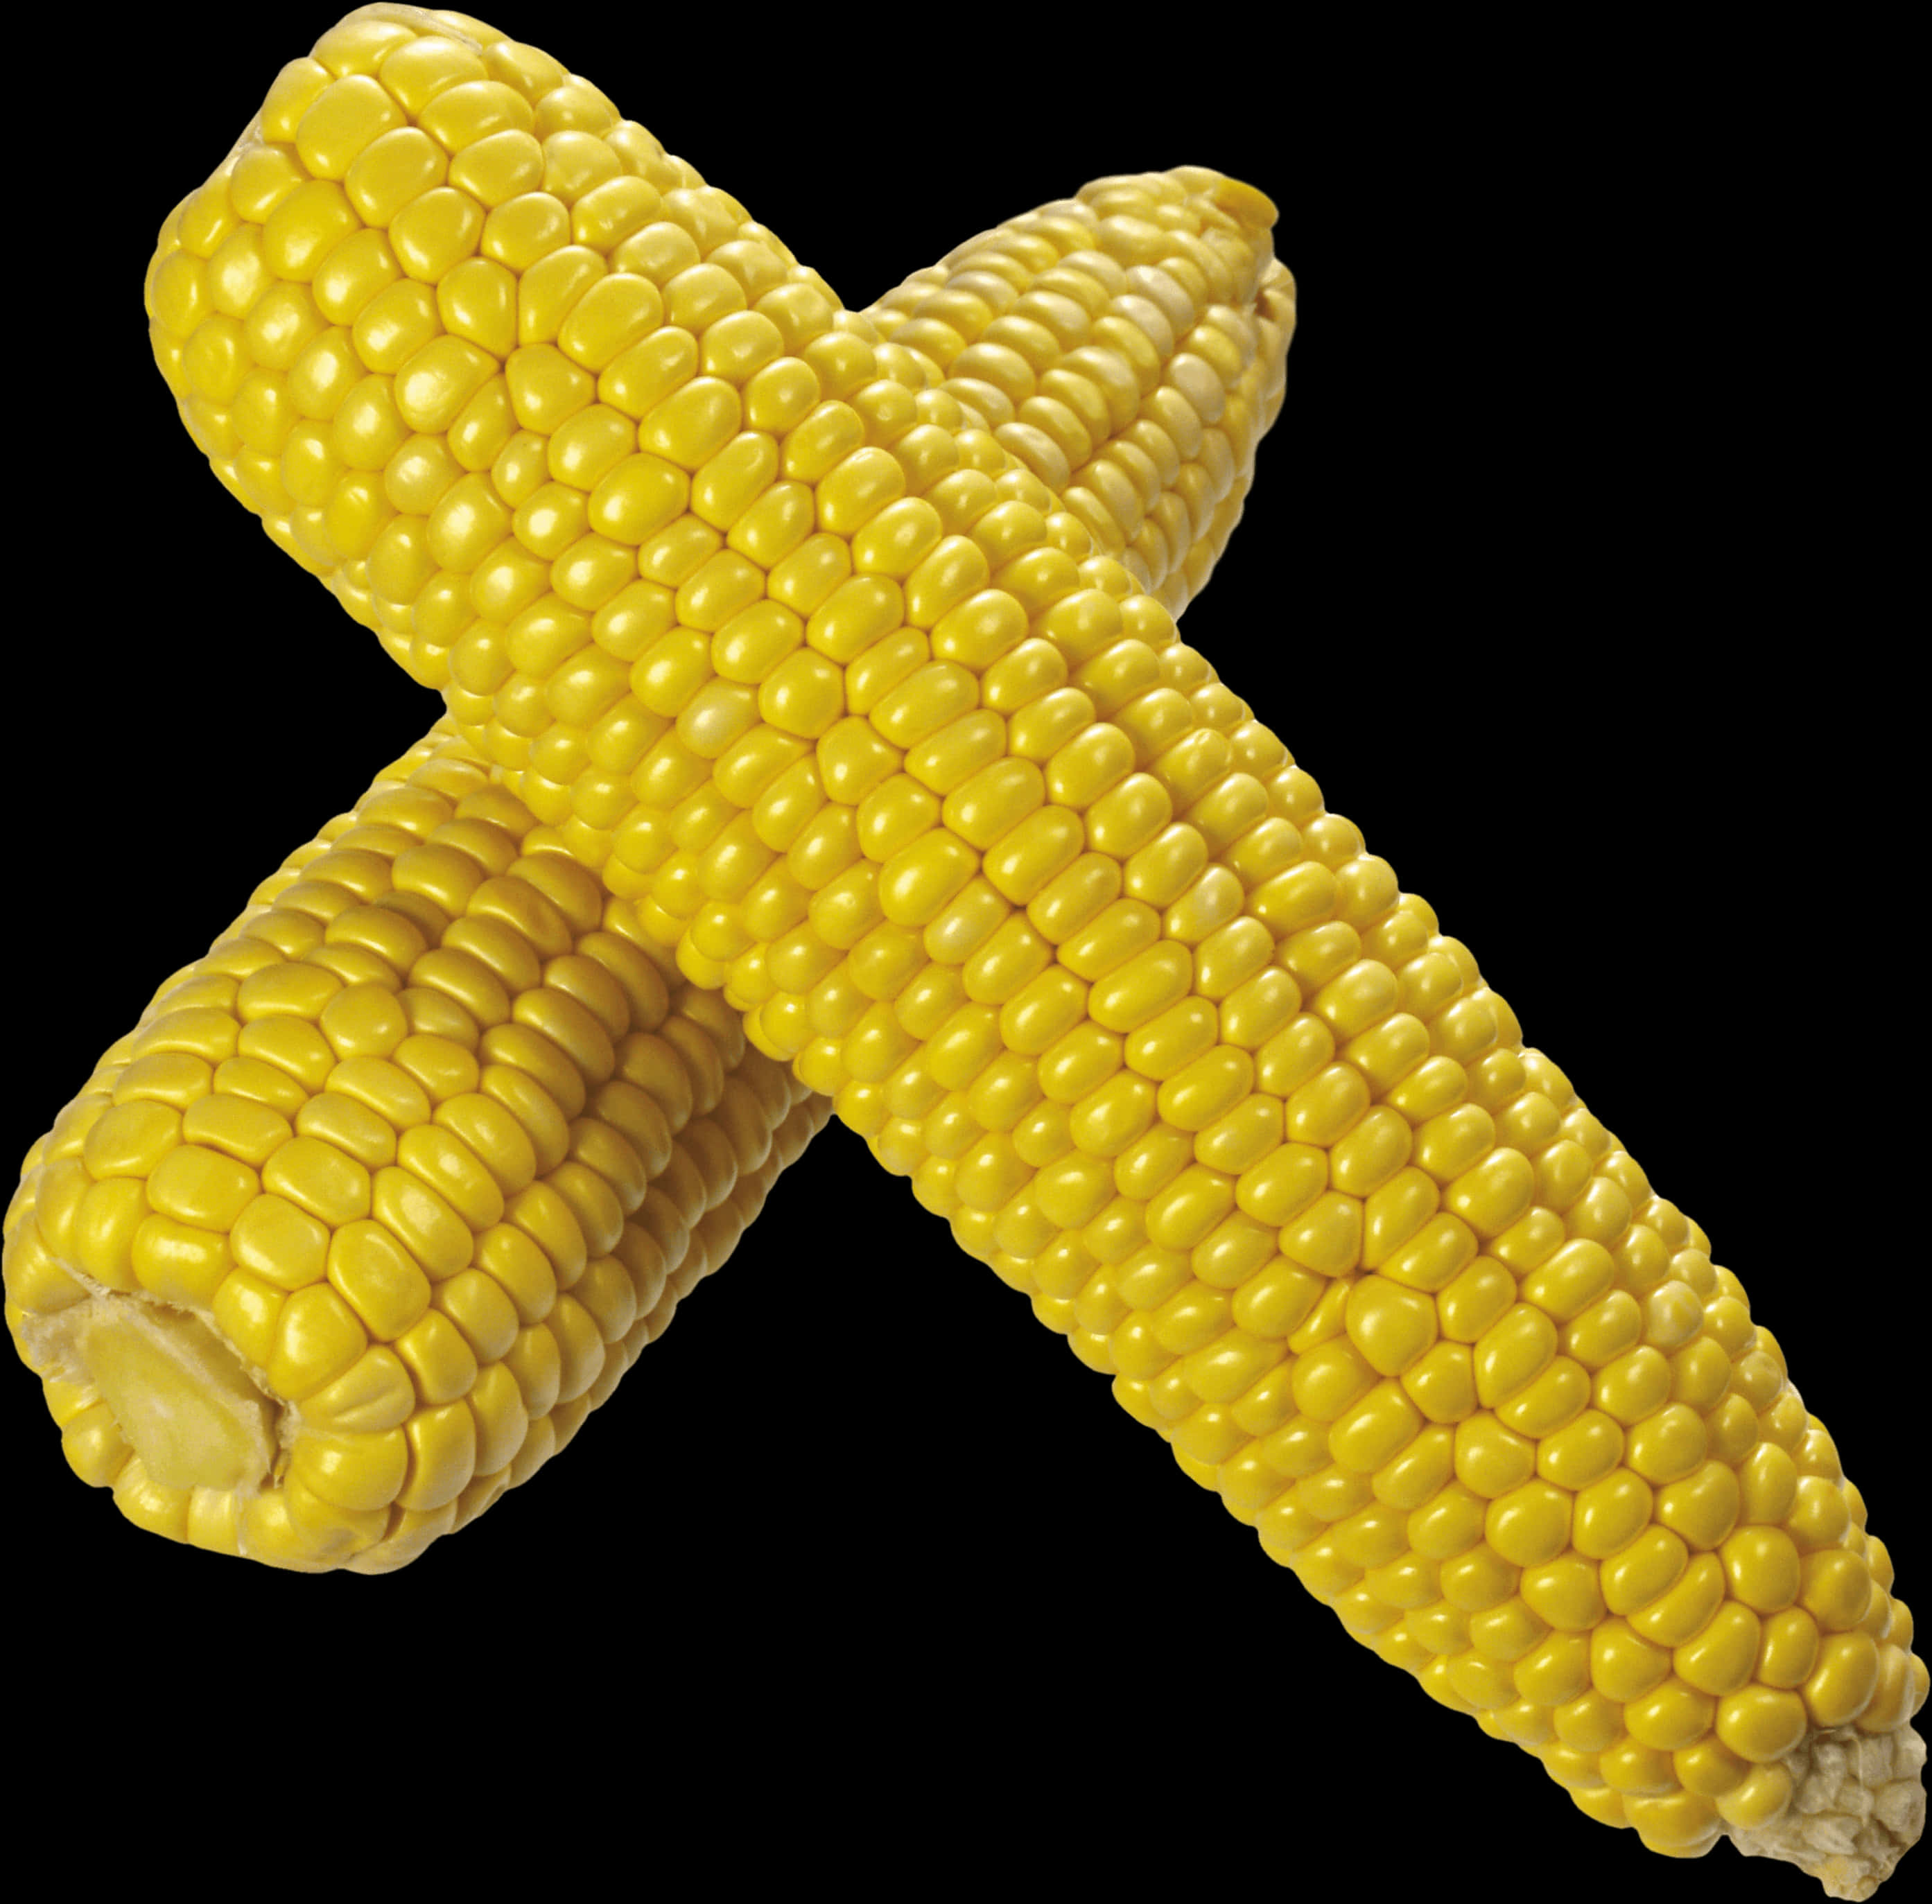 Two Corn On The Cob